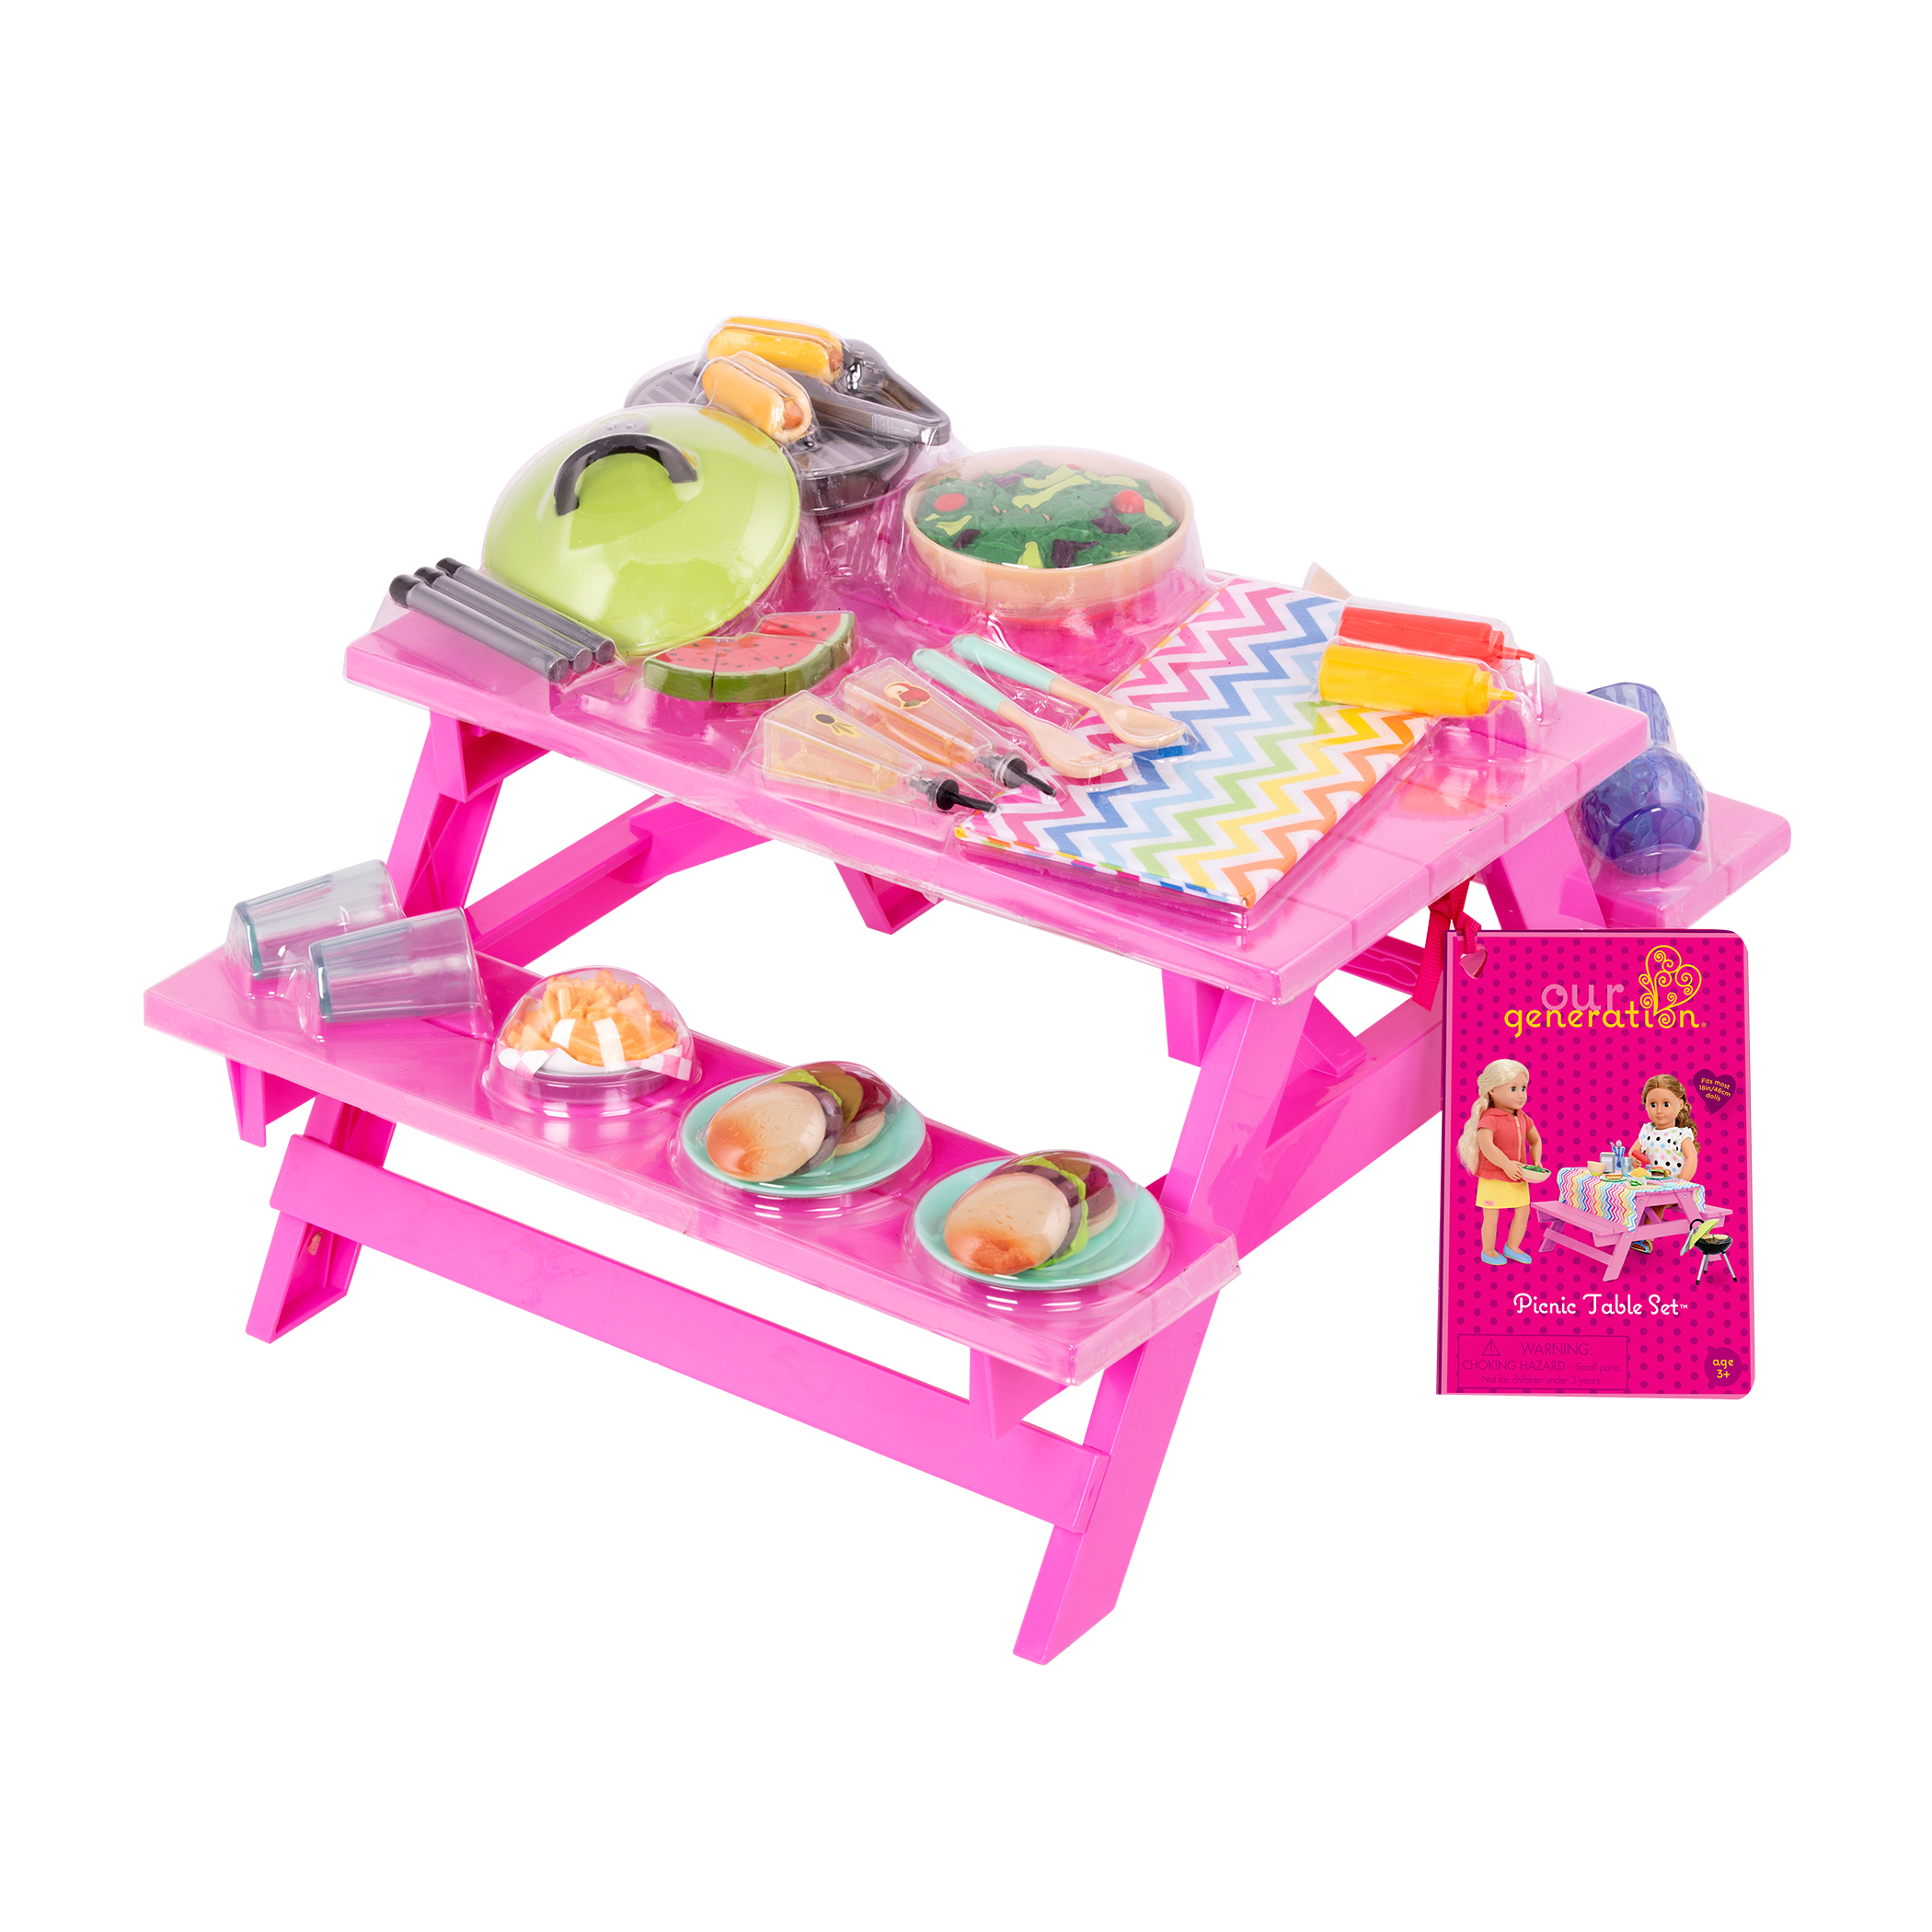 Two 18-inch dolls with picnic table playset